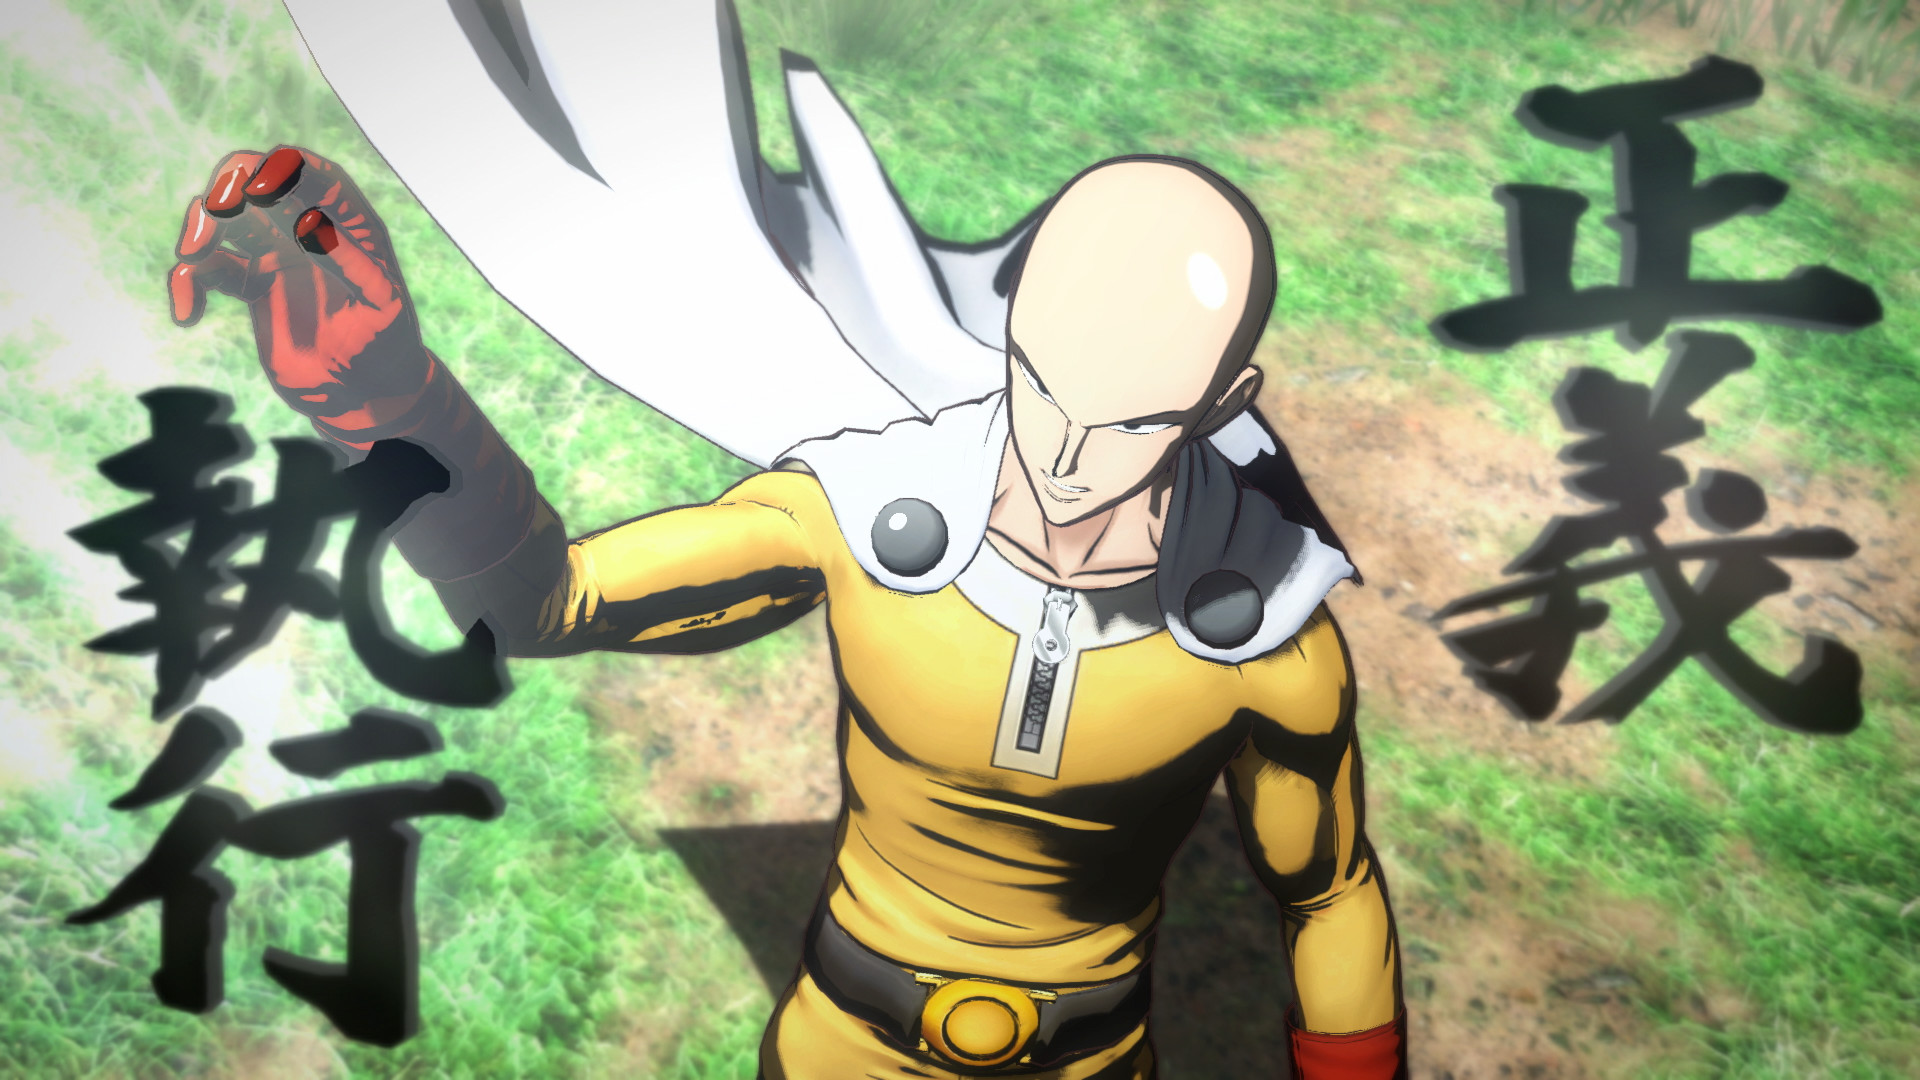 Steam Community :: ONE PUNCH MAN: A HERO NOBODY KNOWS